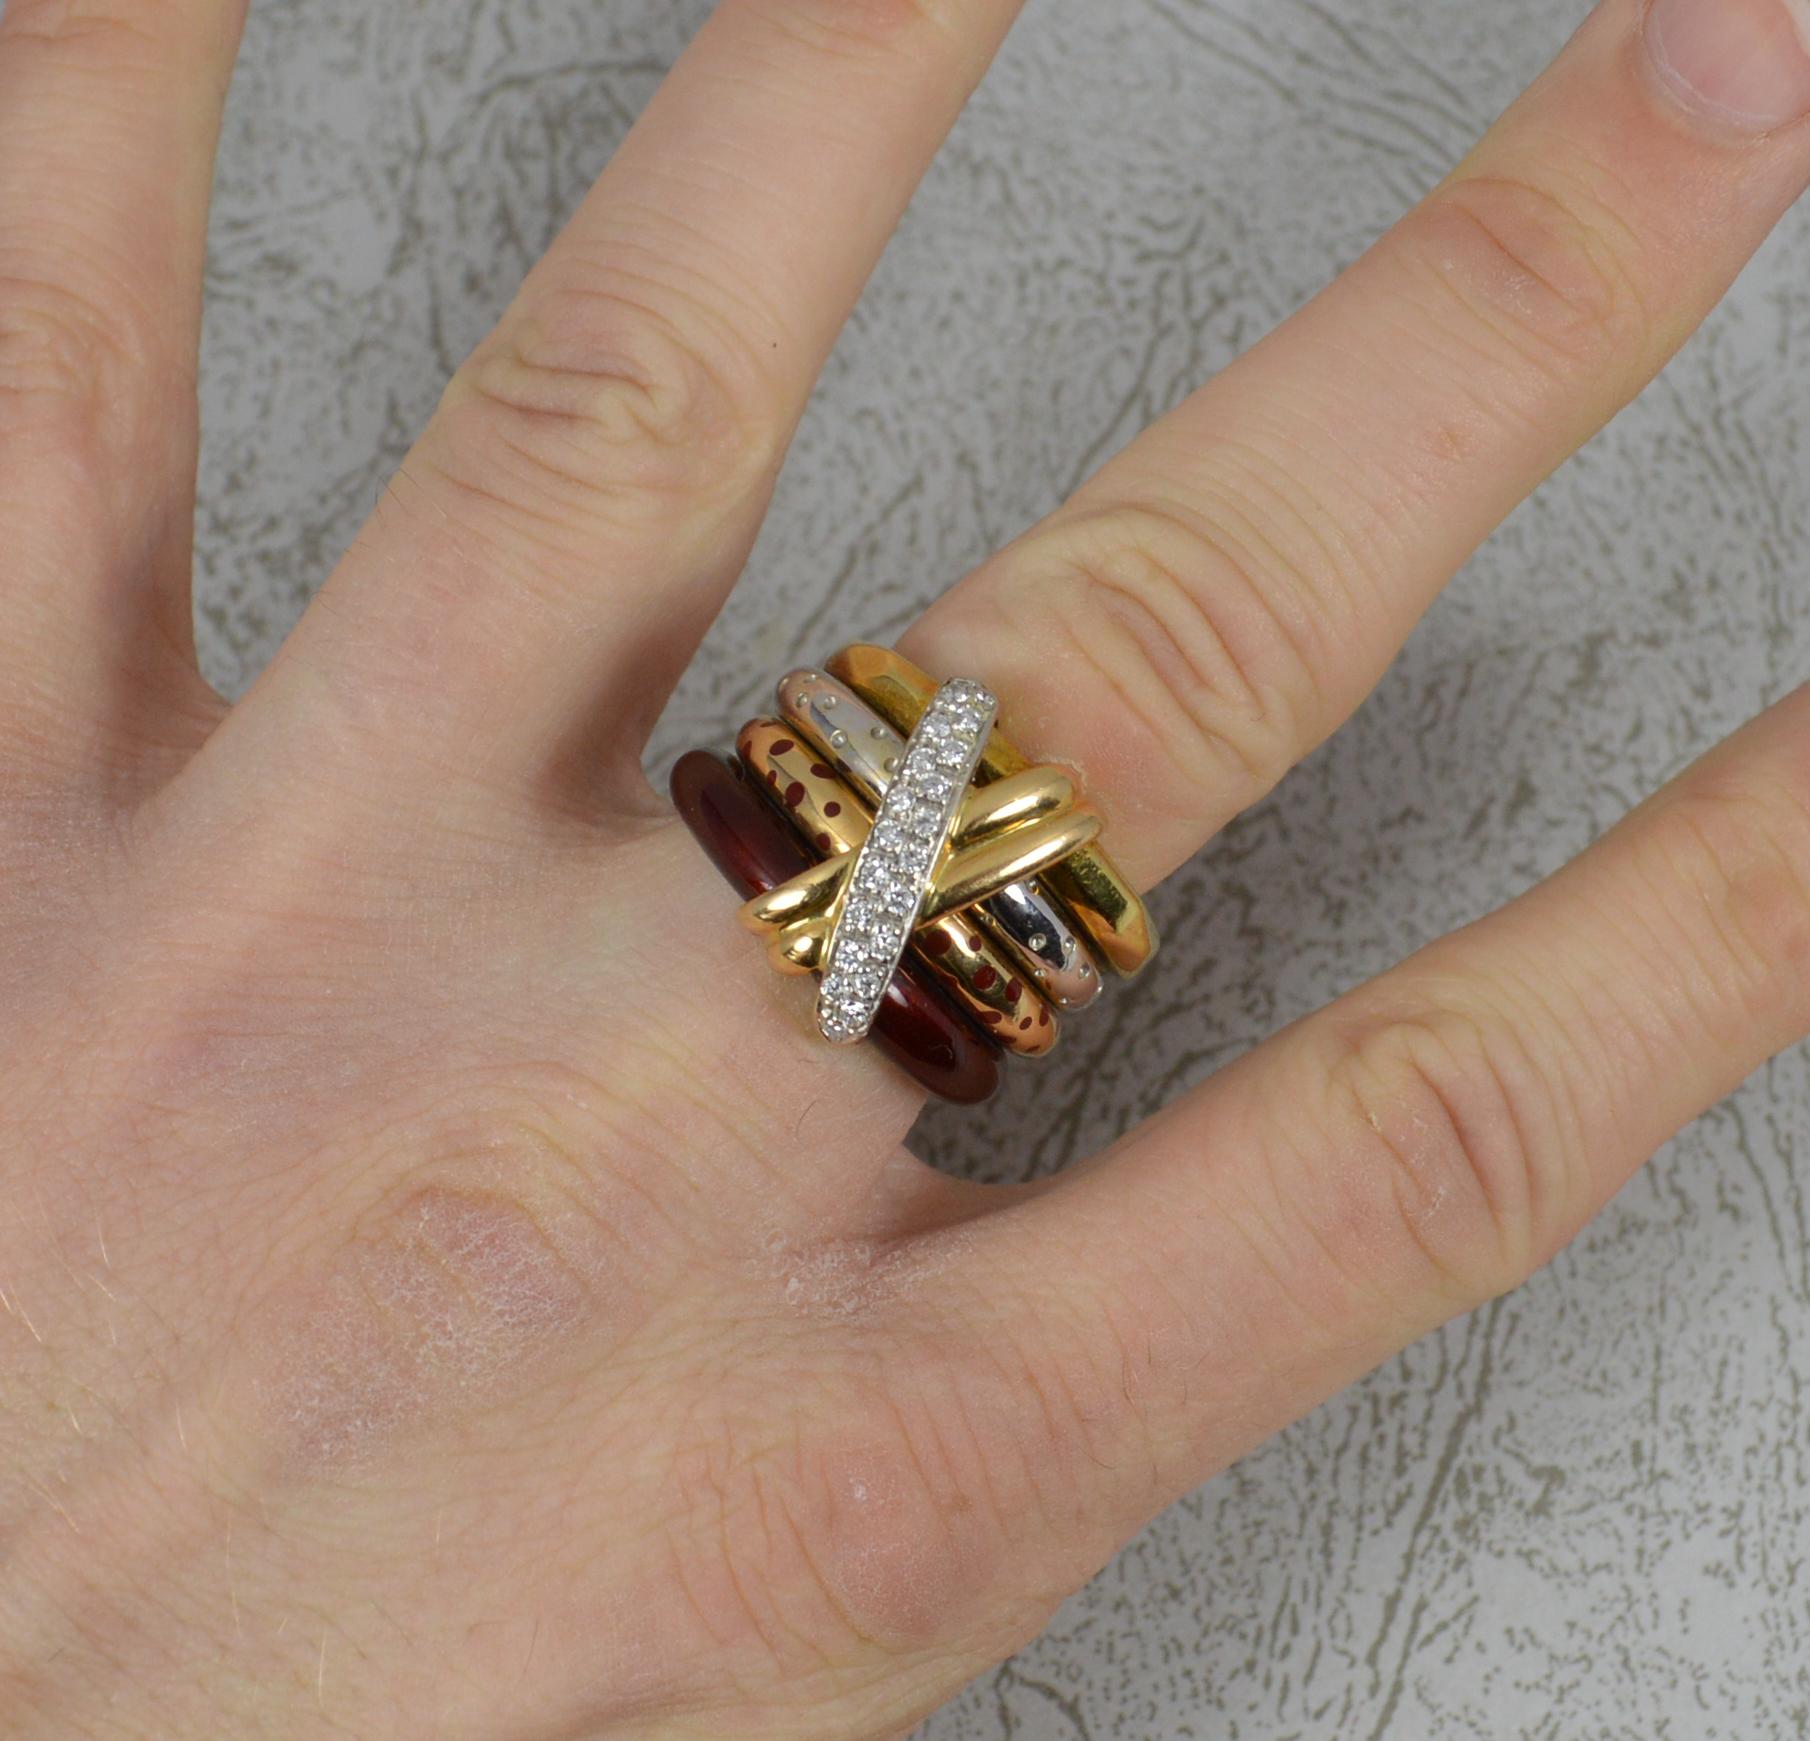 A stunning La Nouvelle Bague designer ring.
Solid 18 carat gold four band stack ring.
A cross over kiss design front, half yellow gold, half white encrusted with diamonds.
Four bands to include; textured yellow gold, white gold with small dots,